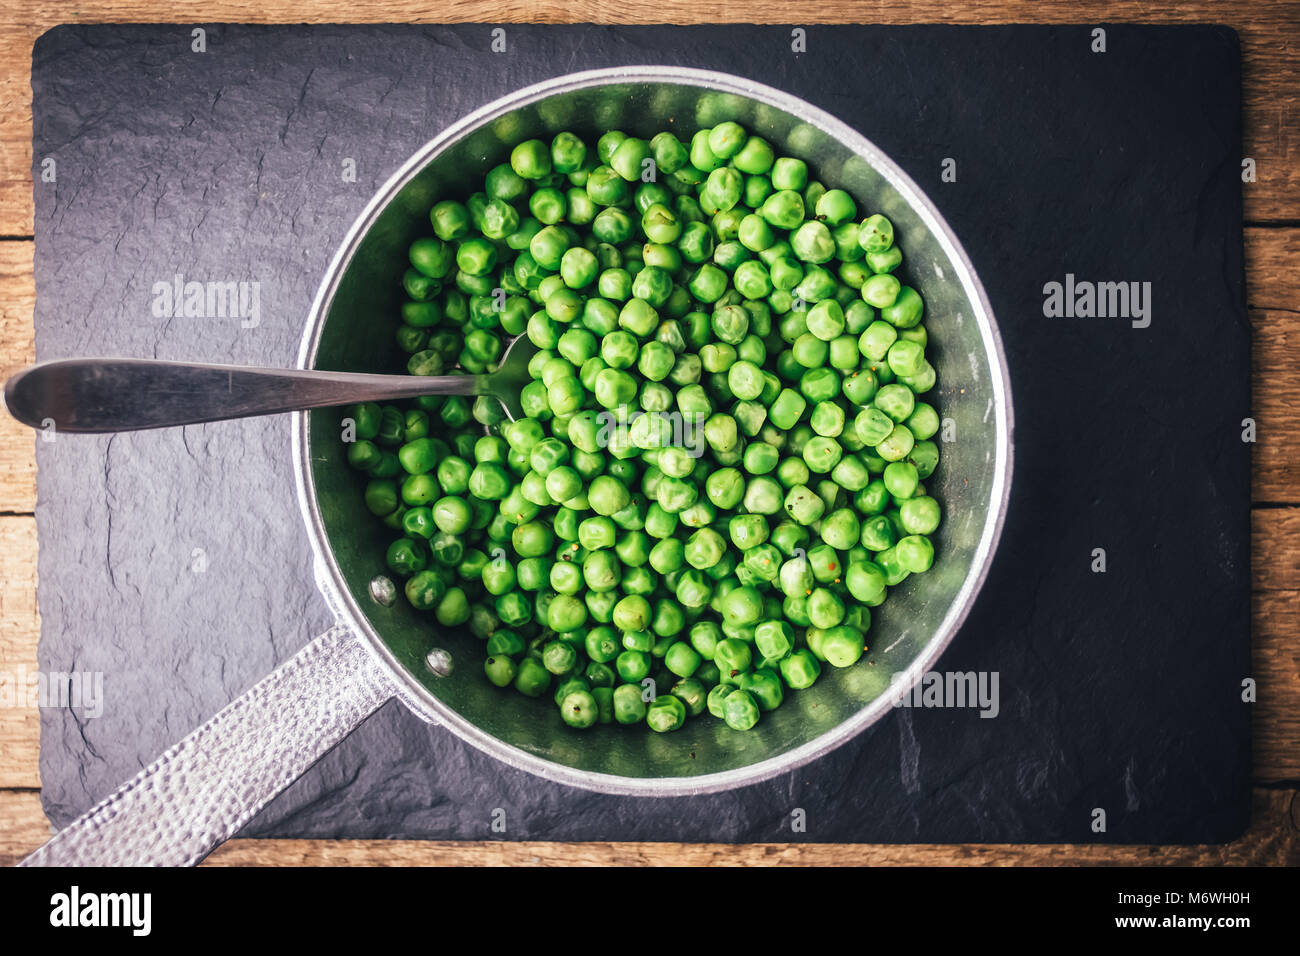 Green peas on silver frying pan Stock Photo